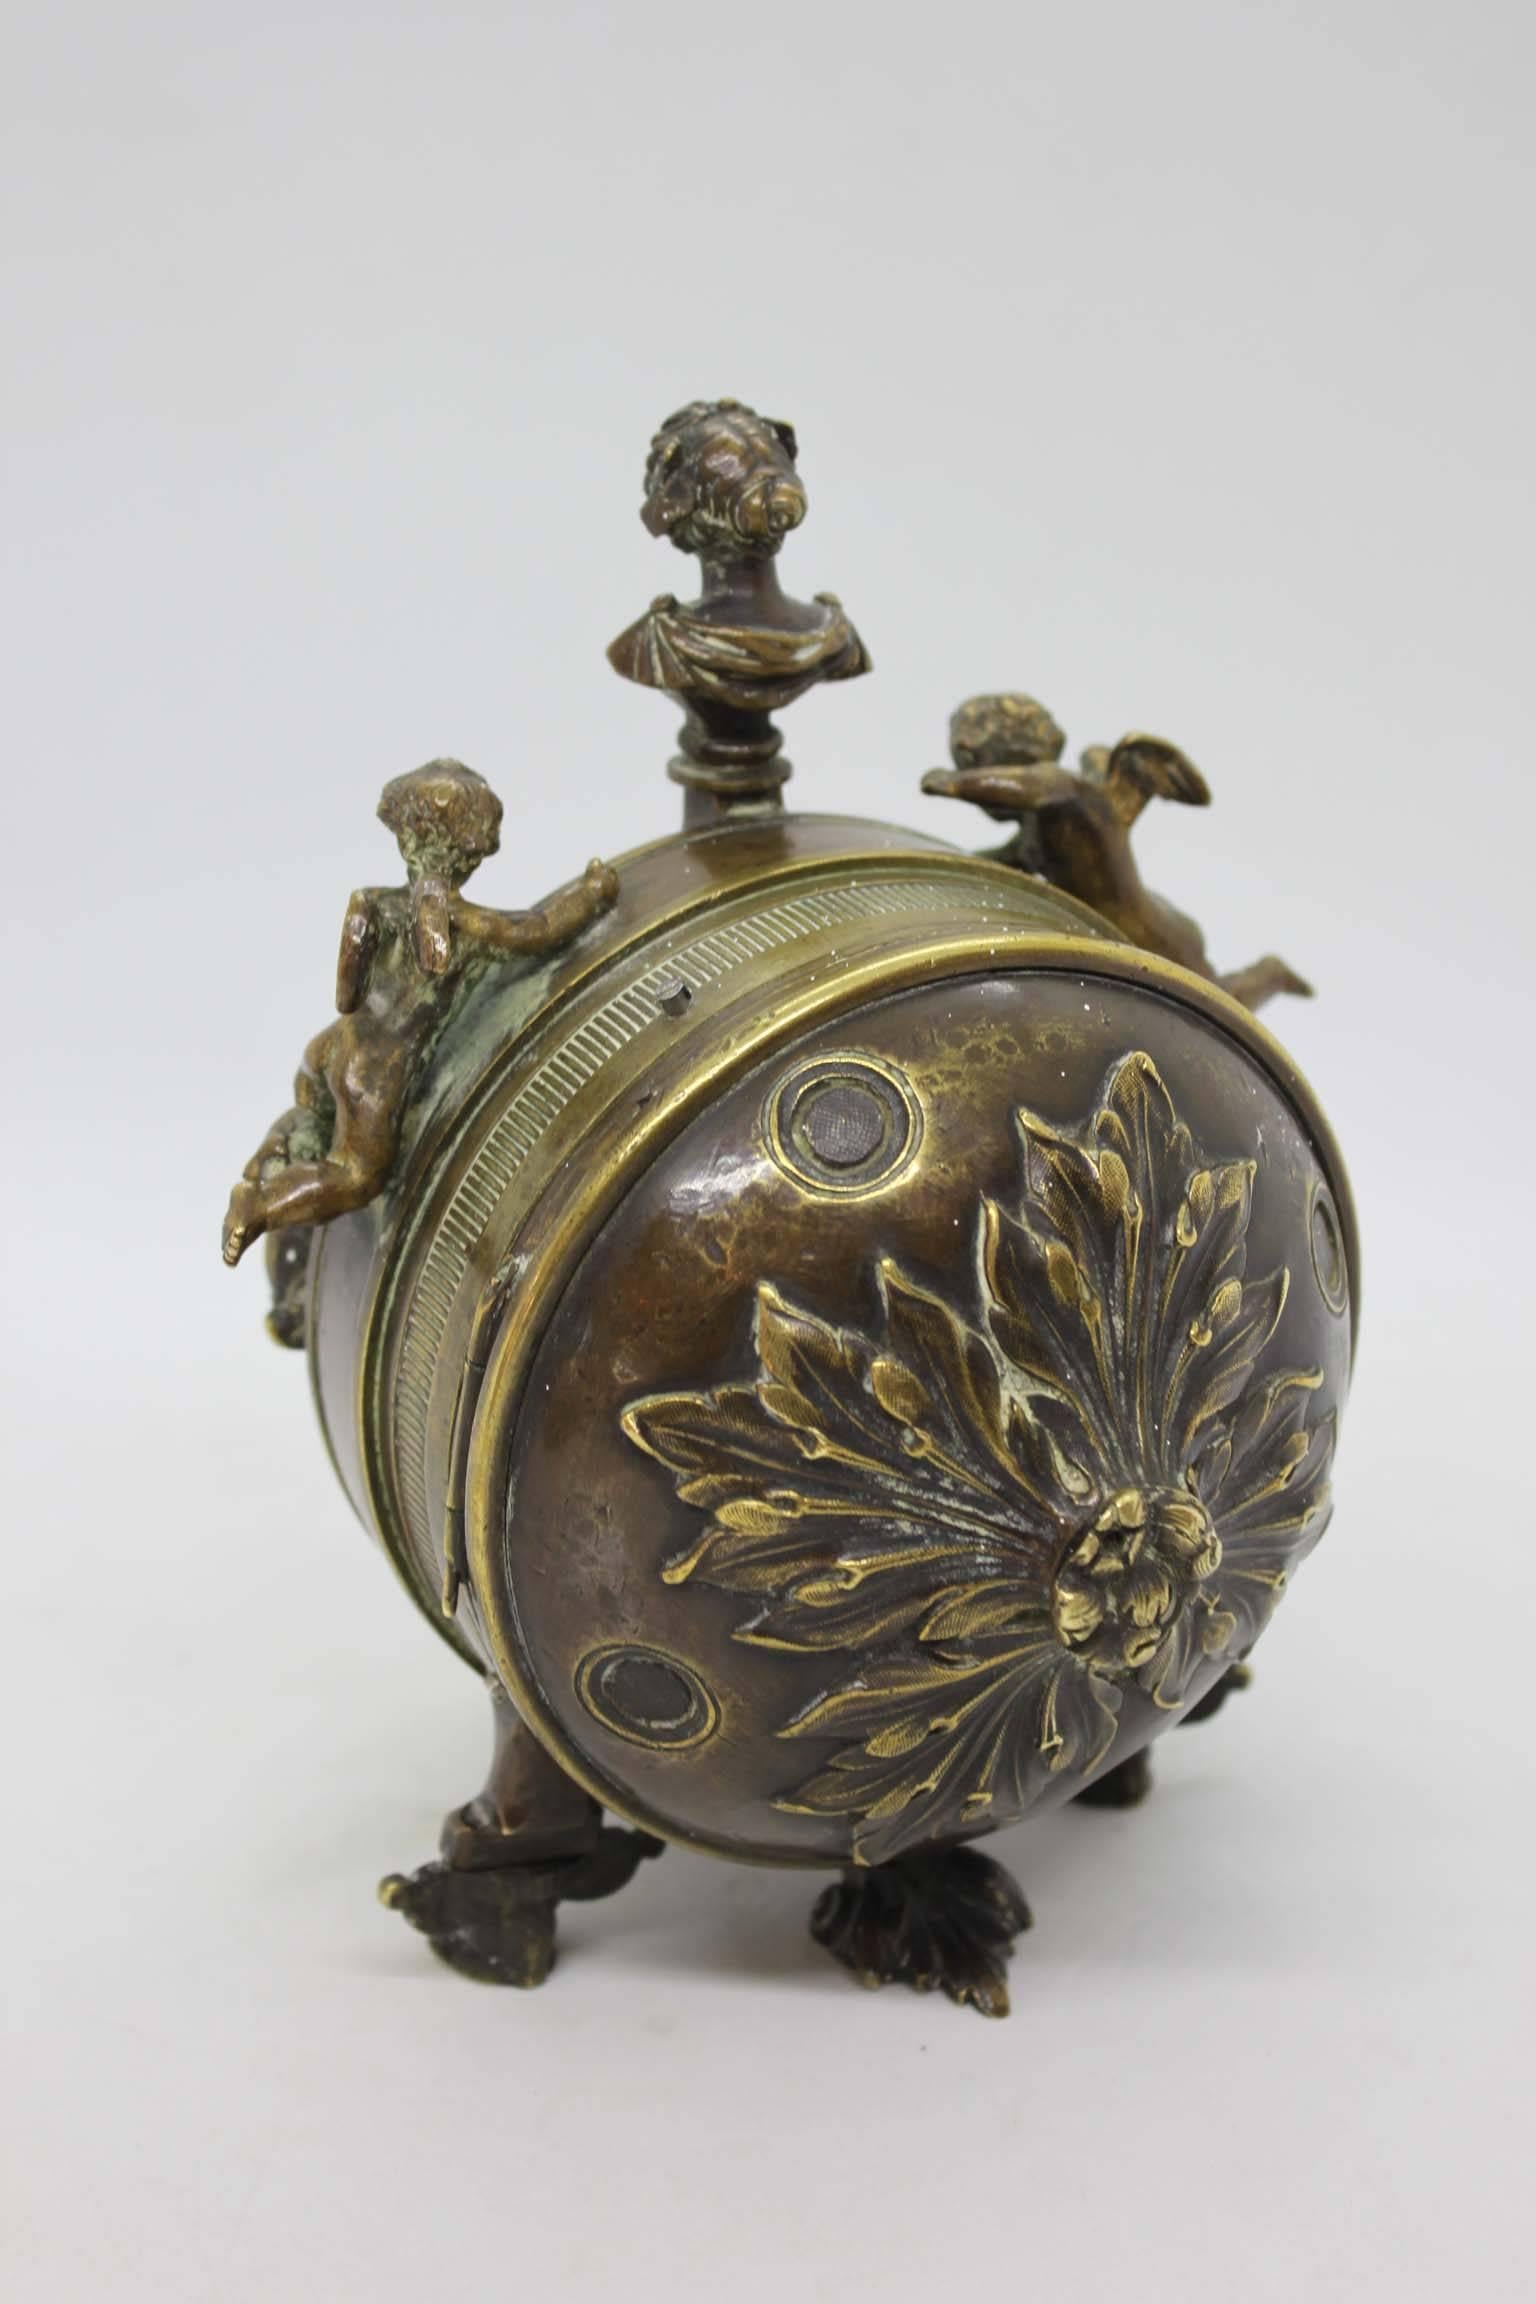 Patinated Late 18th Century Small Round Clock by Isaac Soret & Fils